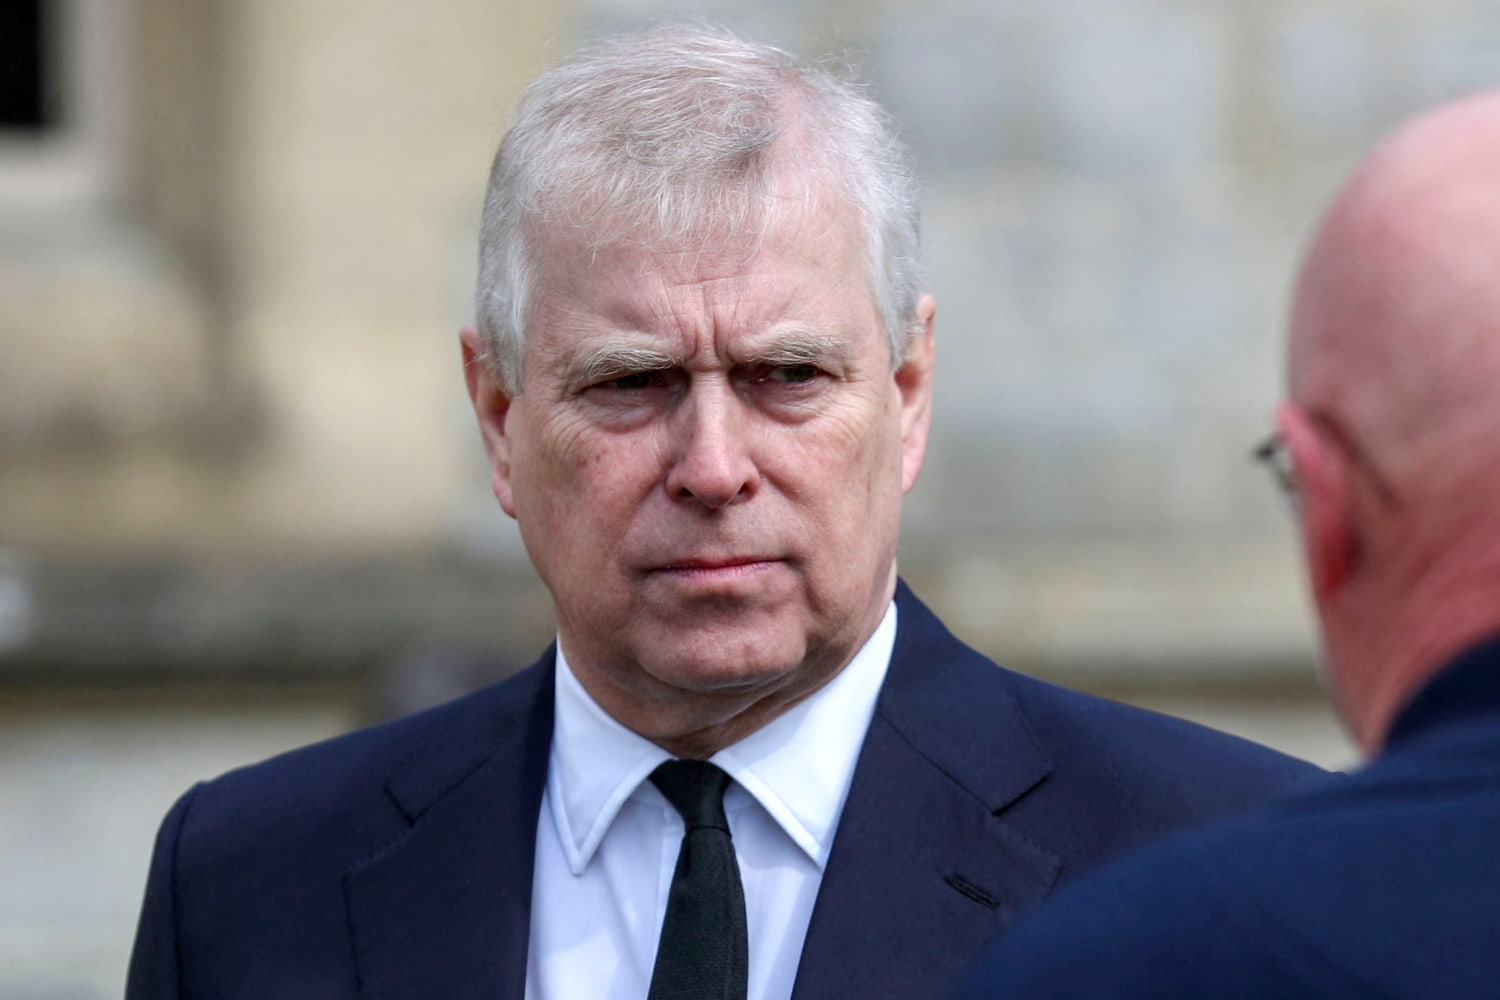 U.S. judge rejects Prince Andrew’s bid to dismiss sexual abuse lawsuit